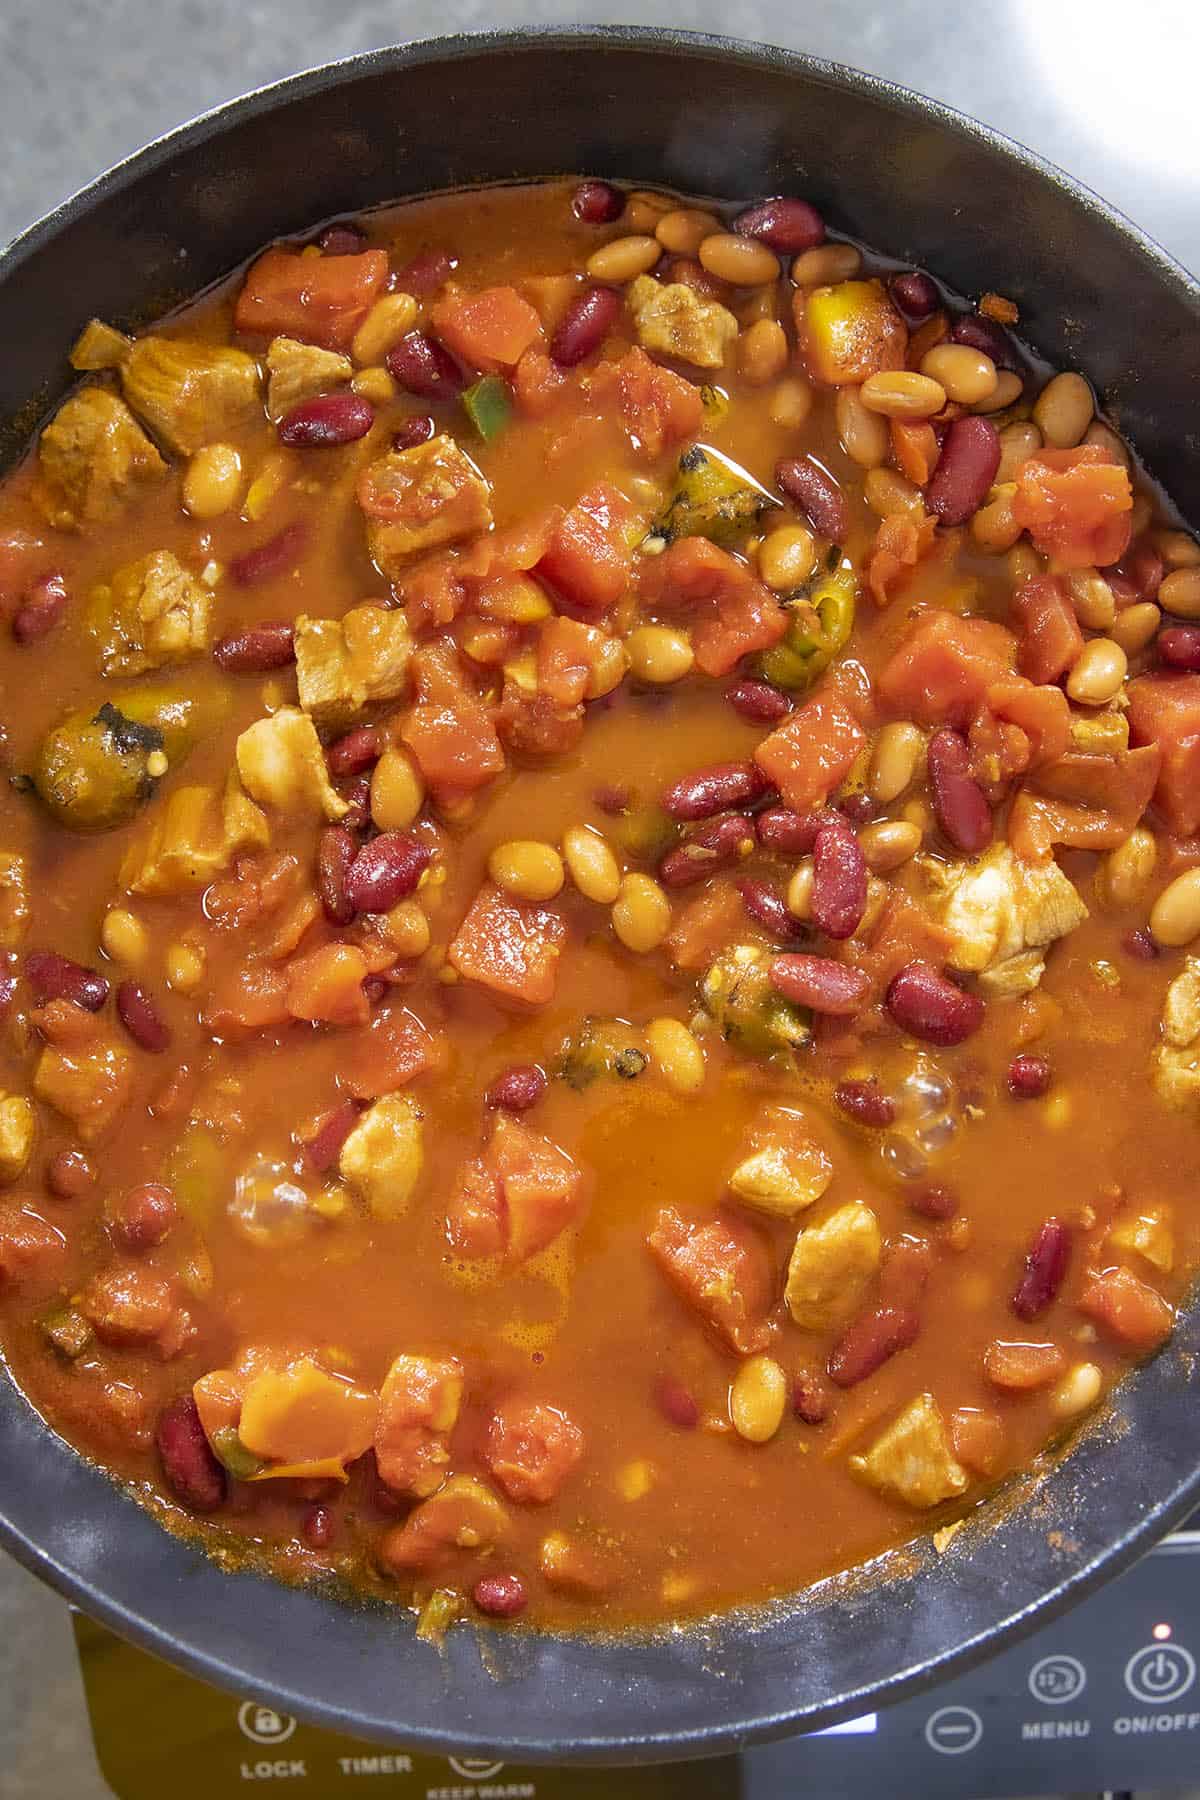 Adding beans to the Pork Chili with Roasted Hatch Chiles